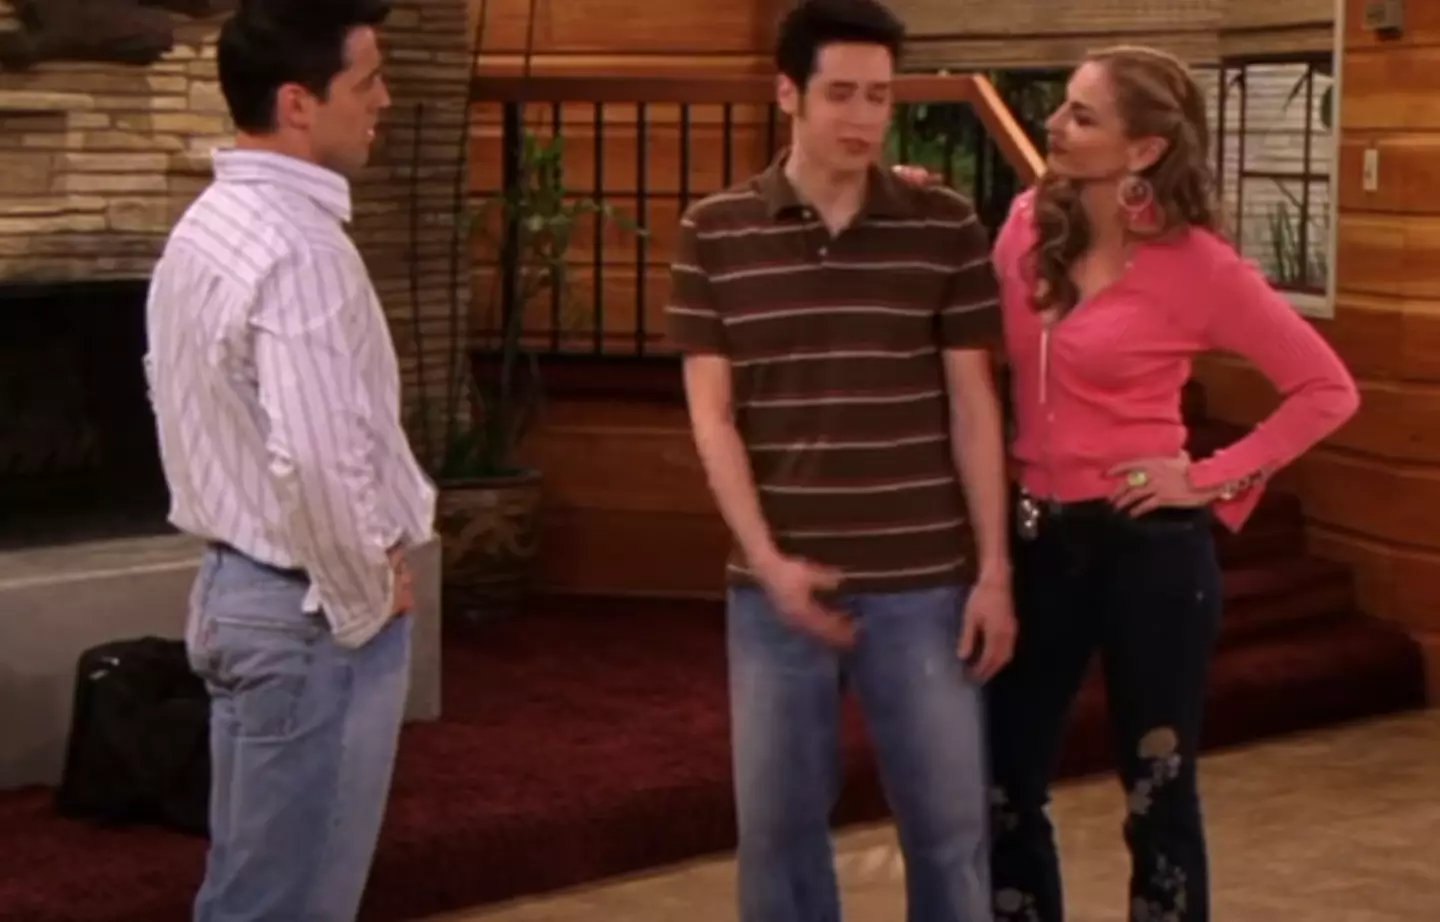 Friends fans were left confused after seeing a resurfaced clip from the show.